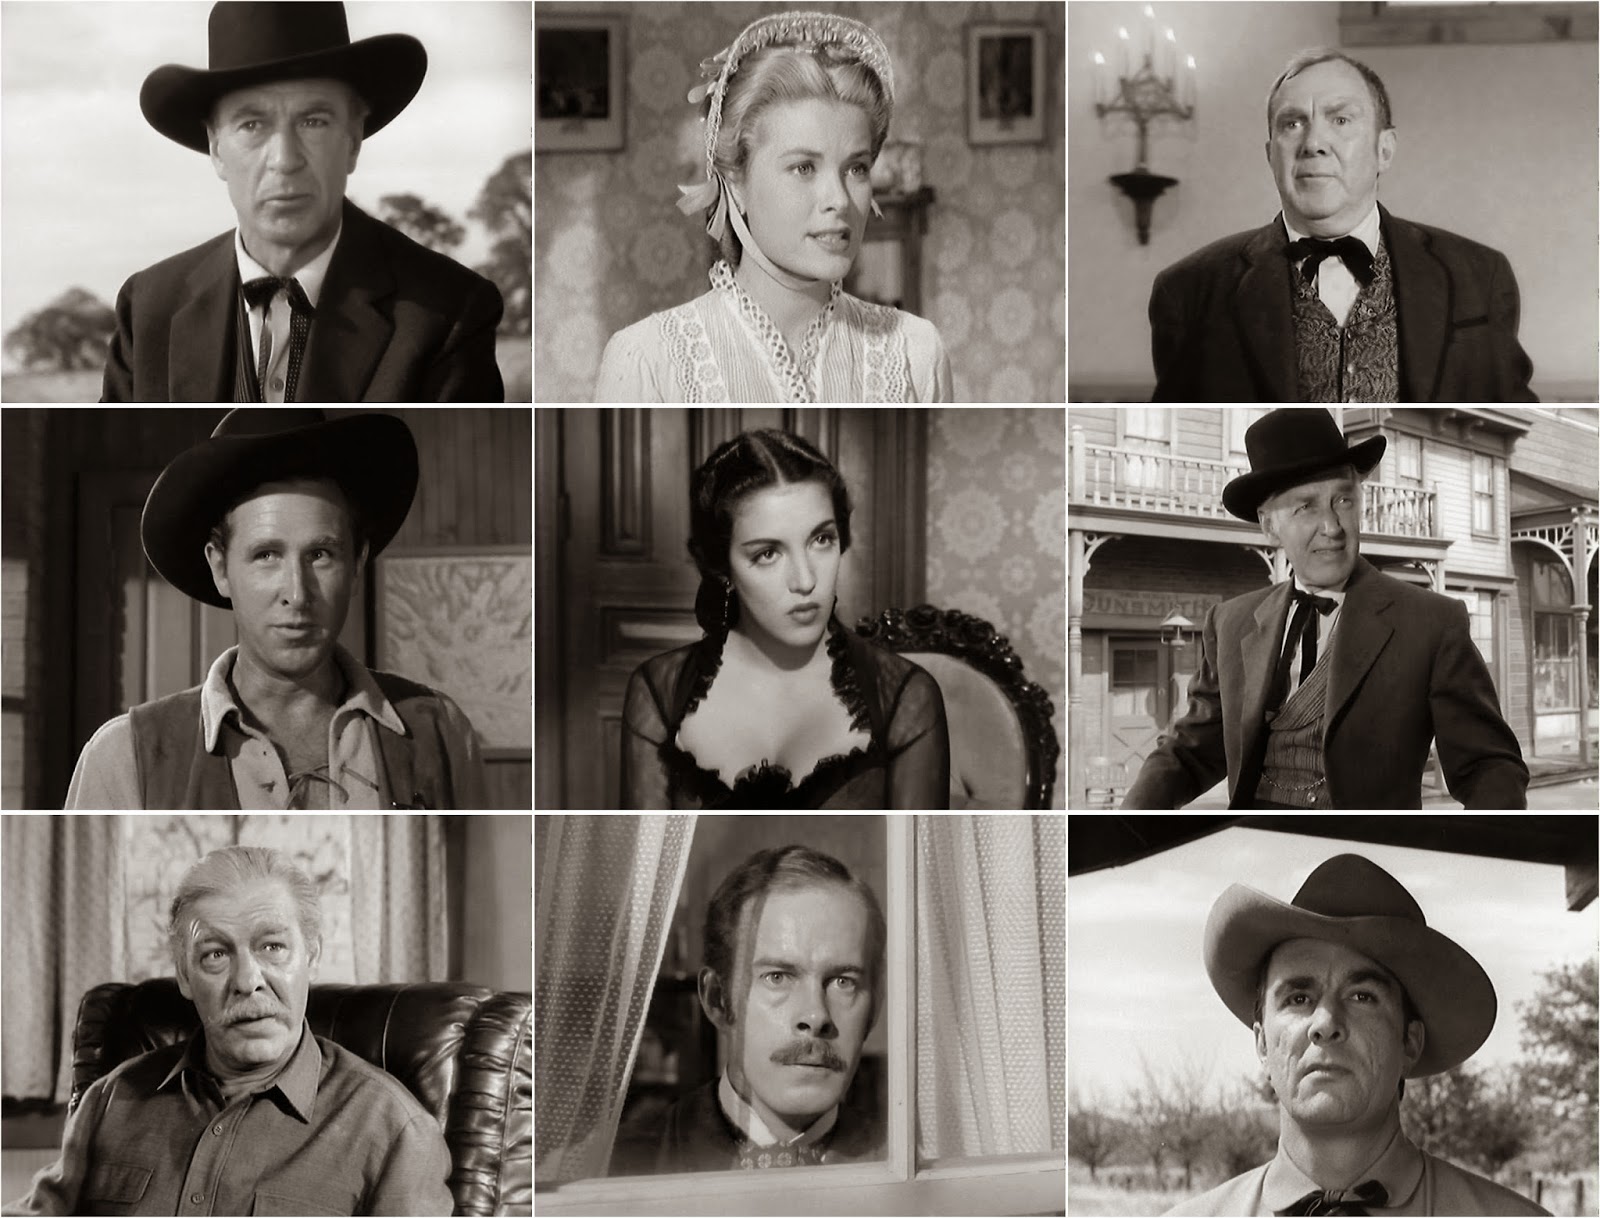 cast-screencaps-from-movies-tv-shows-i-m-watching-on-dvd-high-noon